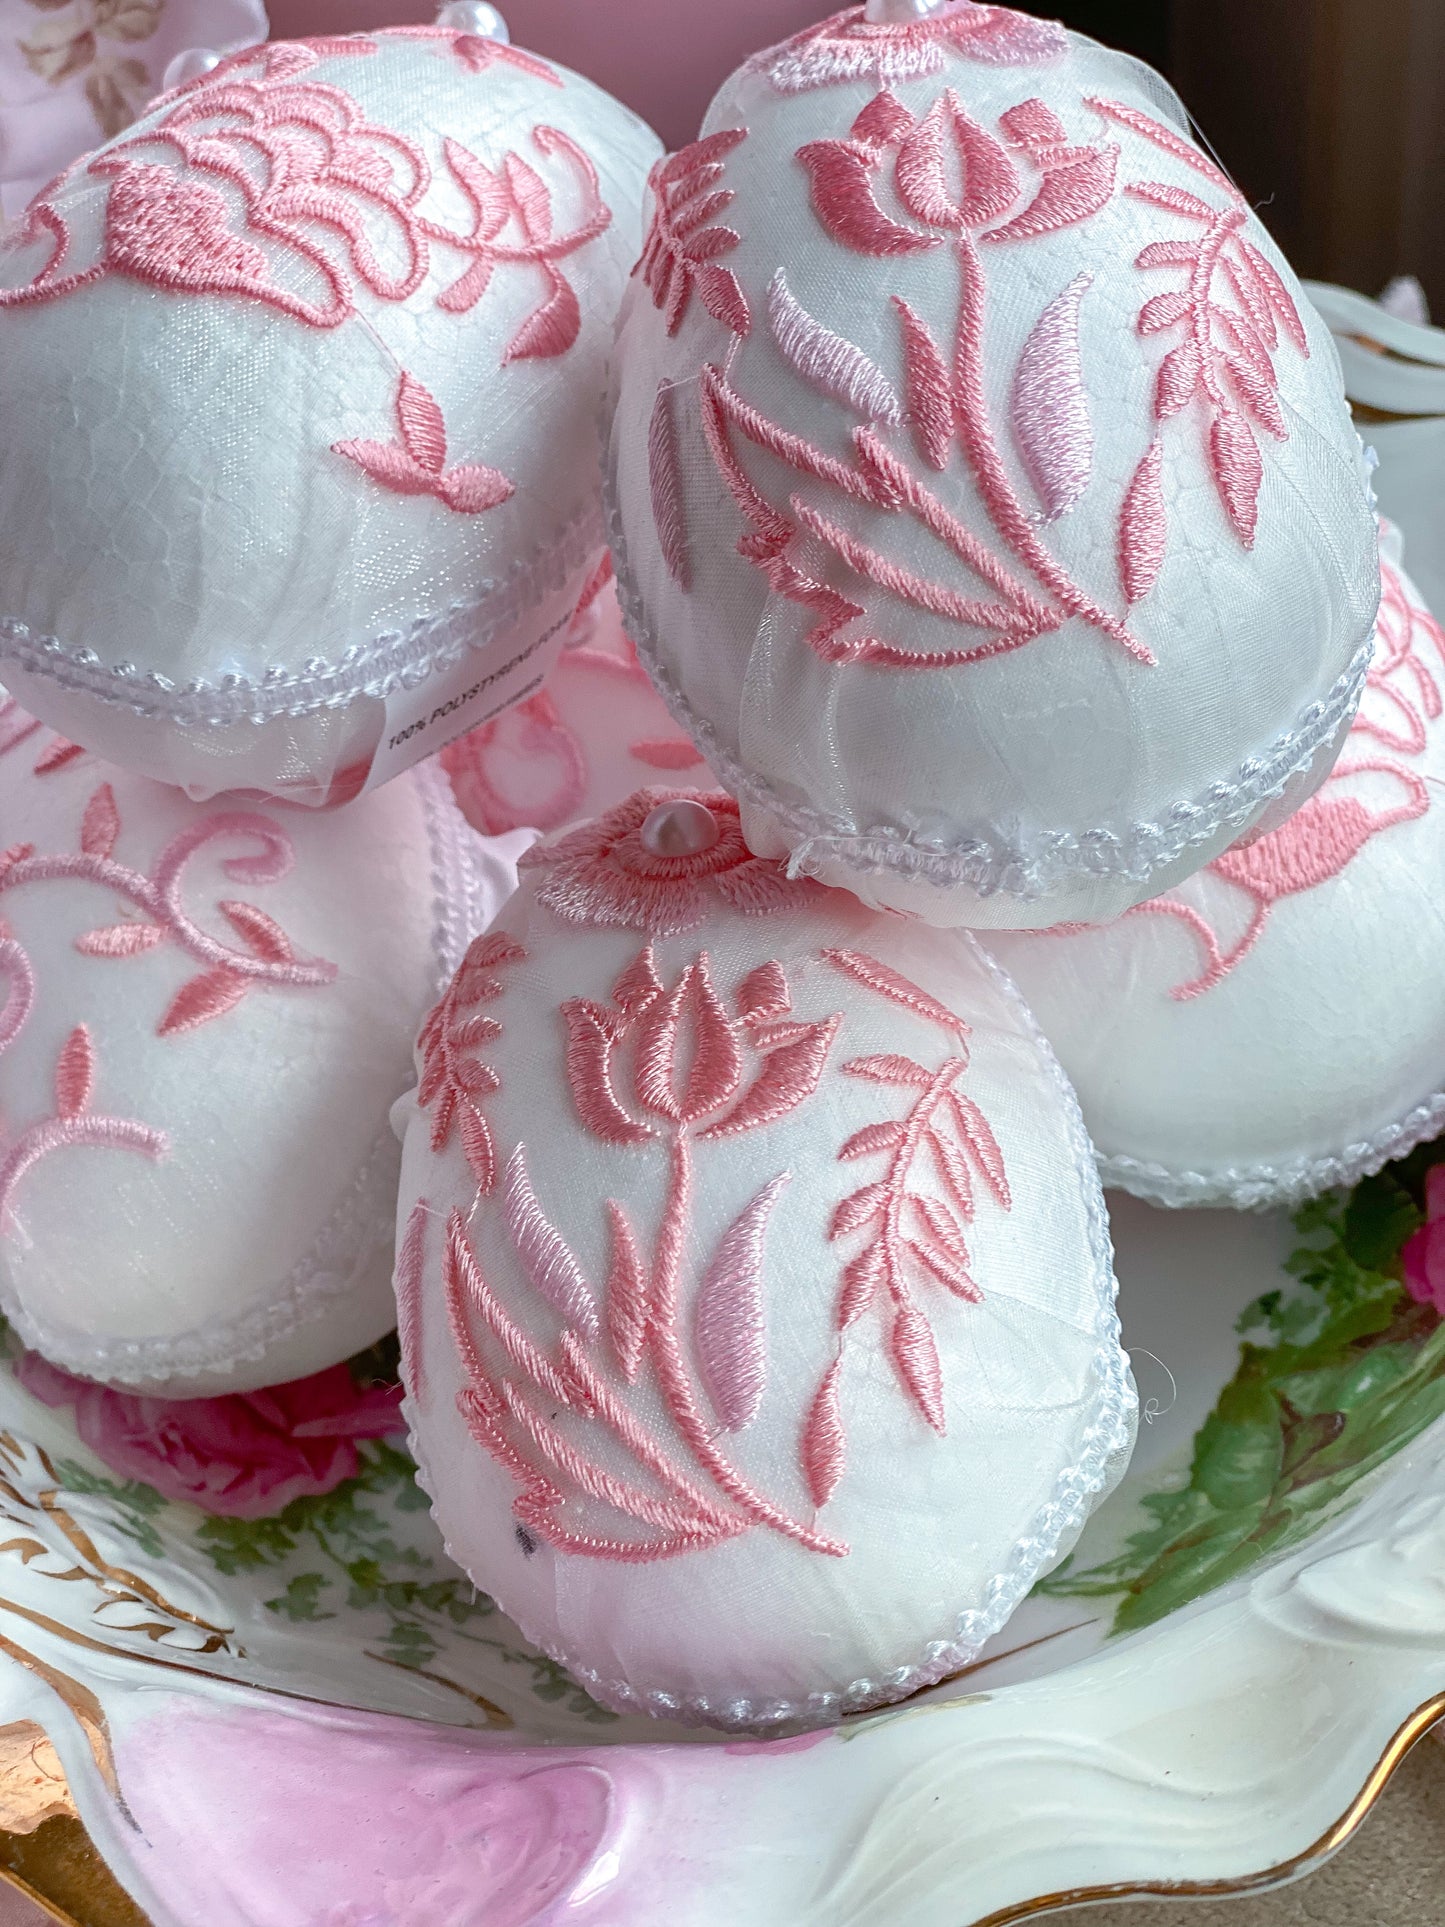 Set of 6 Shabby Chic Pink Embroidered Fabric Egg Bowl Sitters